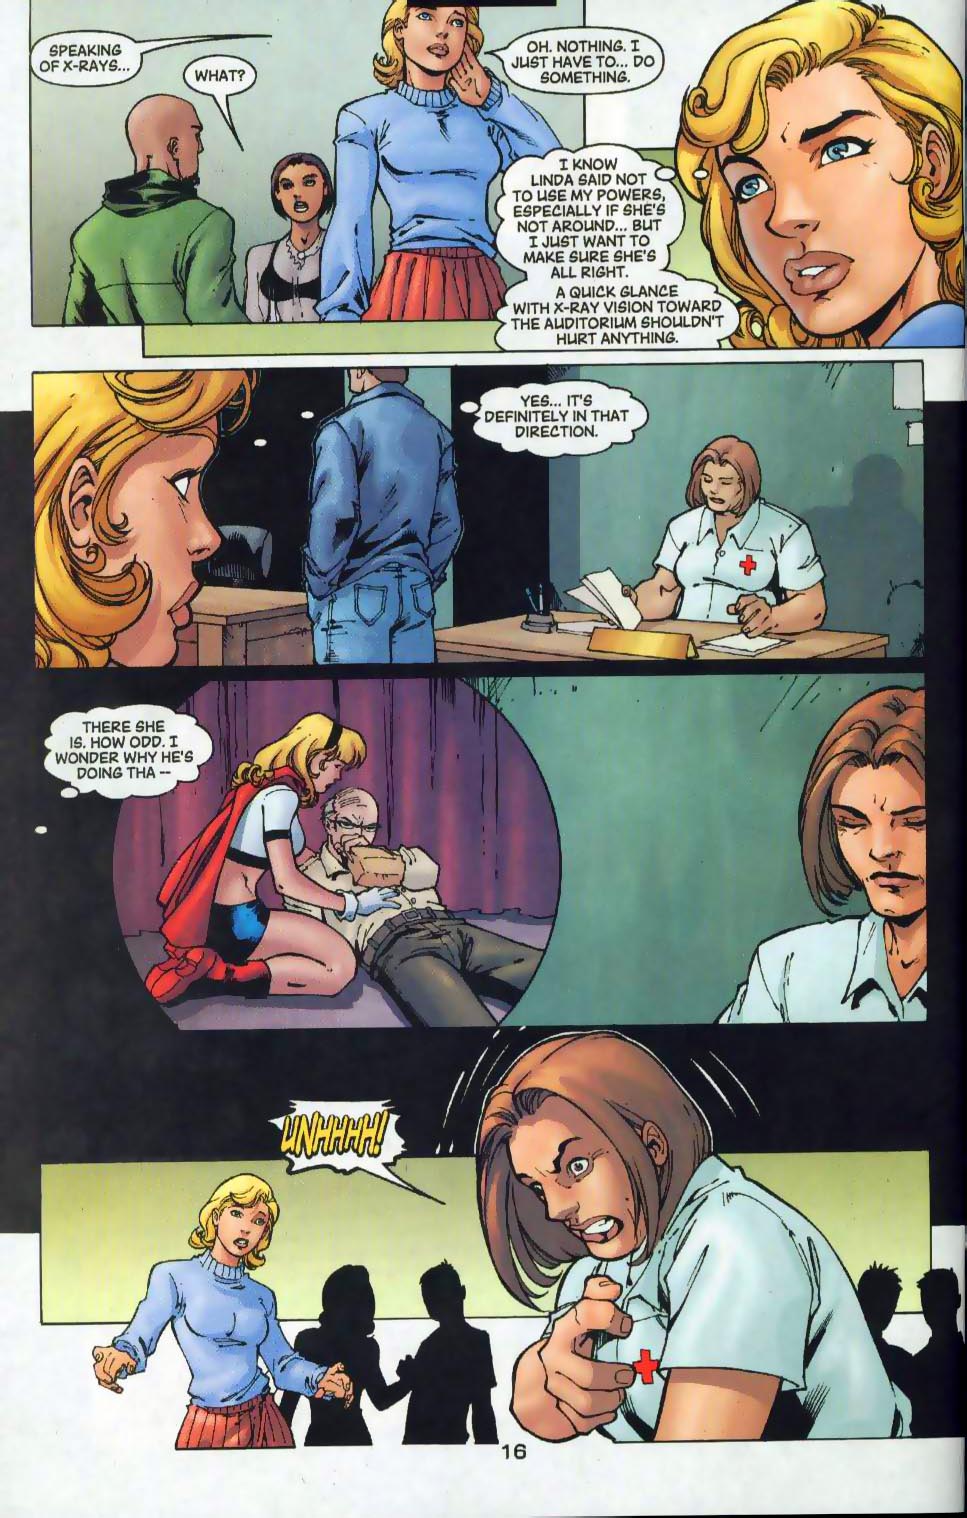 Supergirl (1996) 77 Page 16